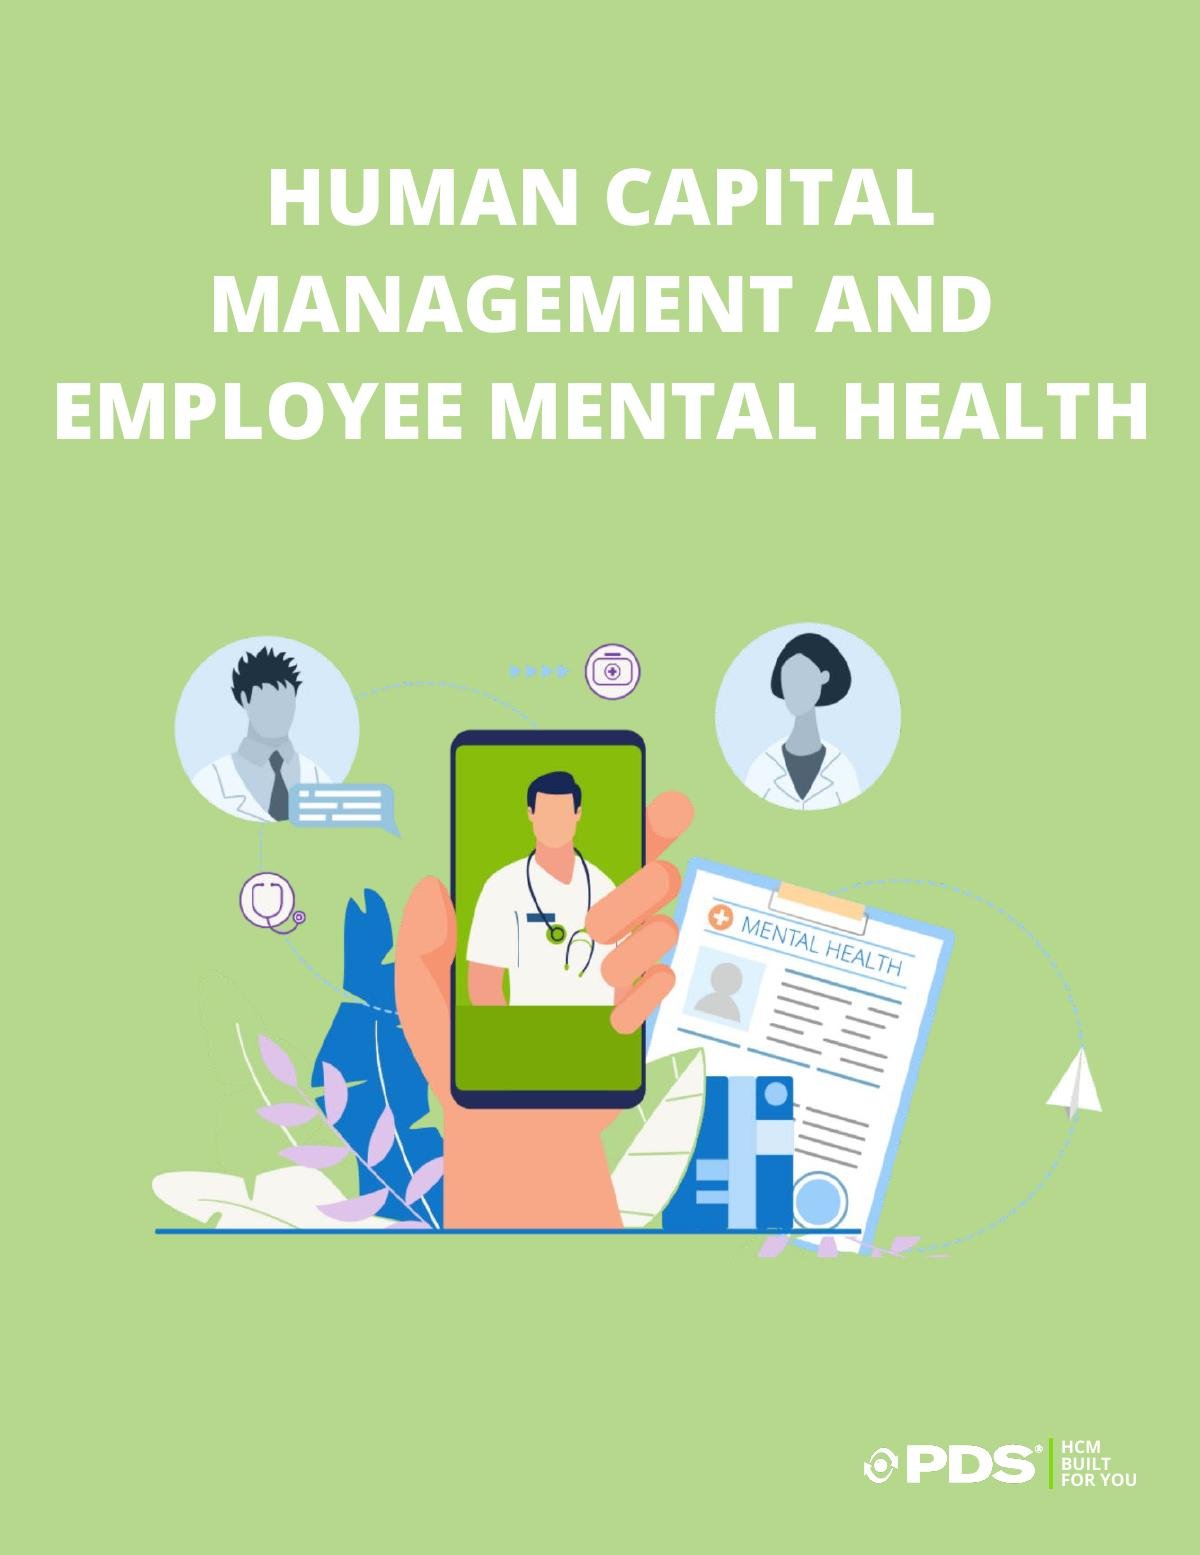 HCM and Employee Mental Health